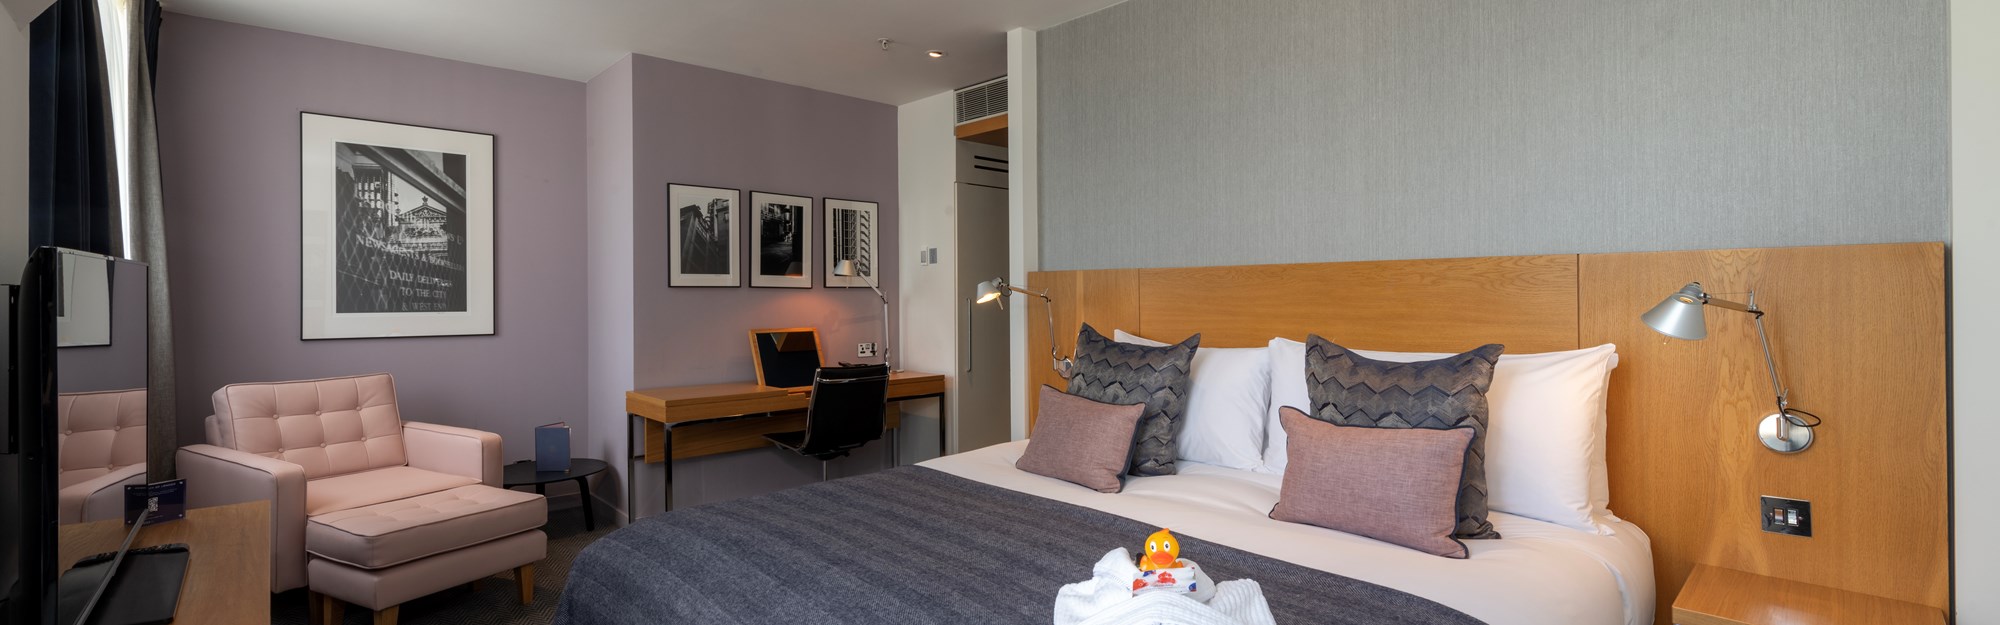 Deluxe Room at Apex City of London Hotel